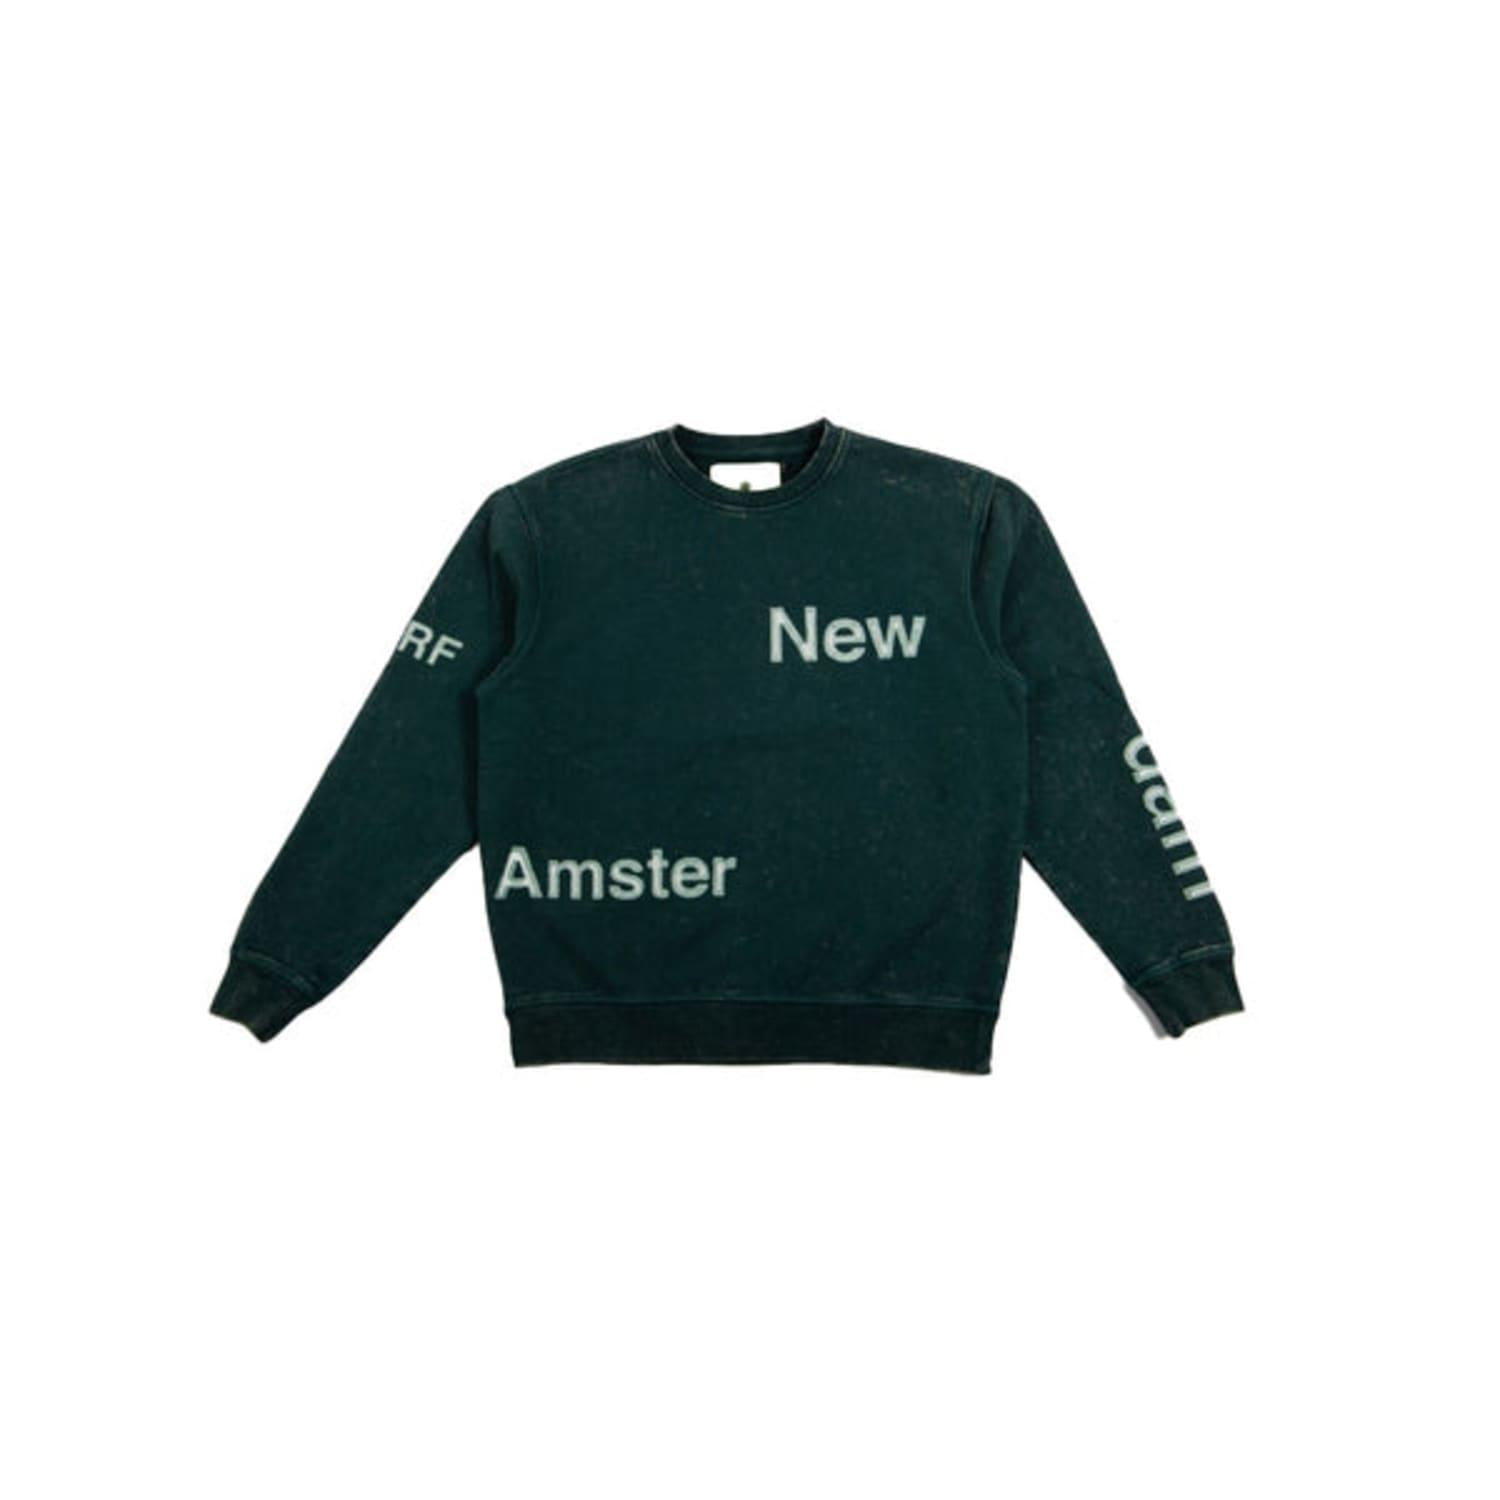 NEW AMSTERDAM SURFASSOCIATION Washed Name Sweat, Green | Lyst